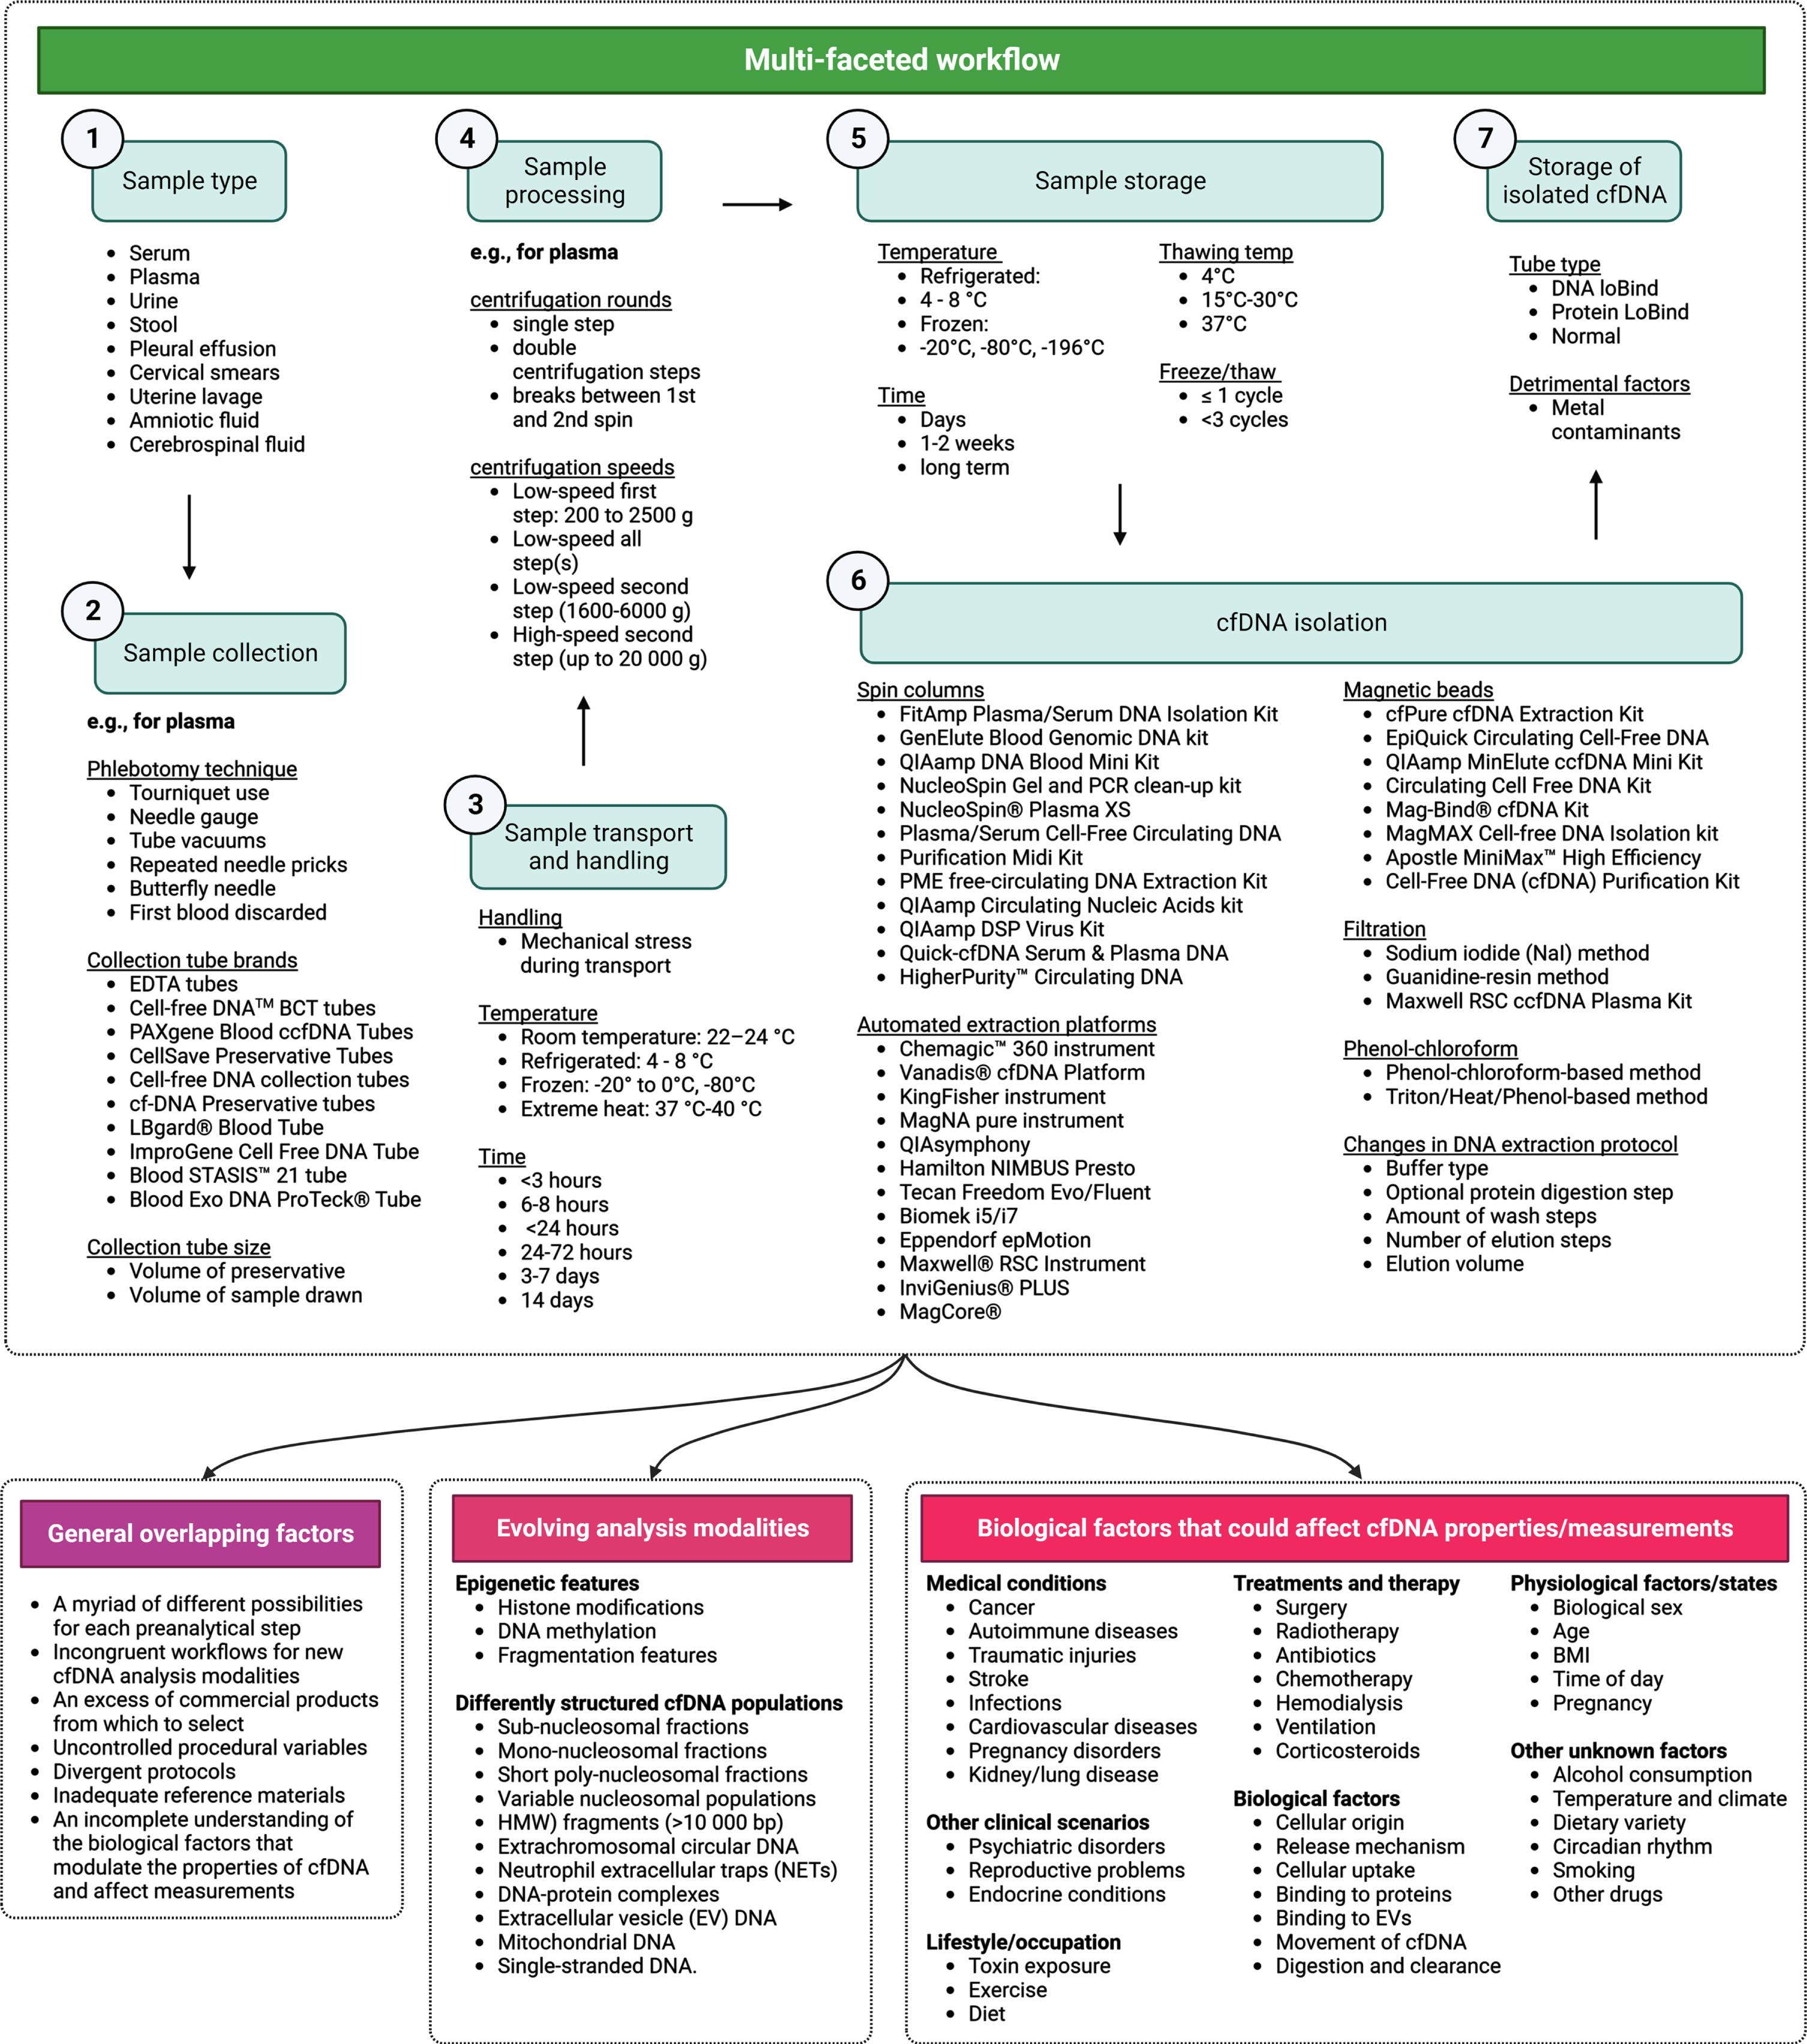 Comprehensive map of cell-free DNA (cfDNA) preanalytics. This figure presents a condensed overview of essential preanalytical factors influencing the quantitative and qualitative aspects of cfDNA measurements. It emphasizes critical elements to be considered during the preanalytical phase for precise and reliable cfDNA evaluation. While a detailed investigation of each factor exceeds the paper’s scope, the text discusses pertinent factors influencing cfDNA preanalytics.